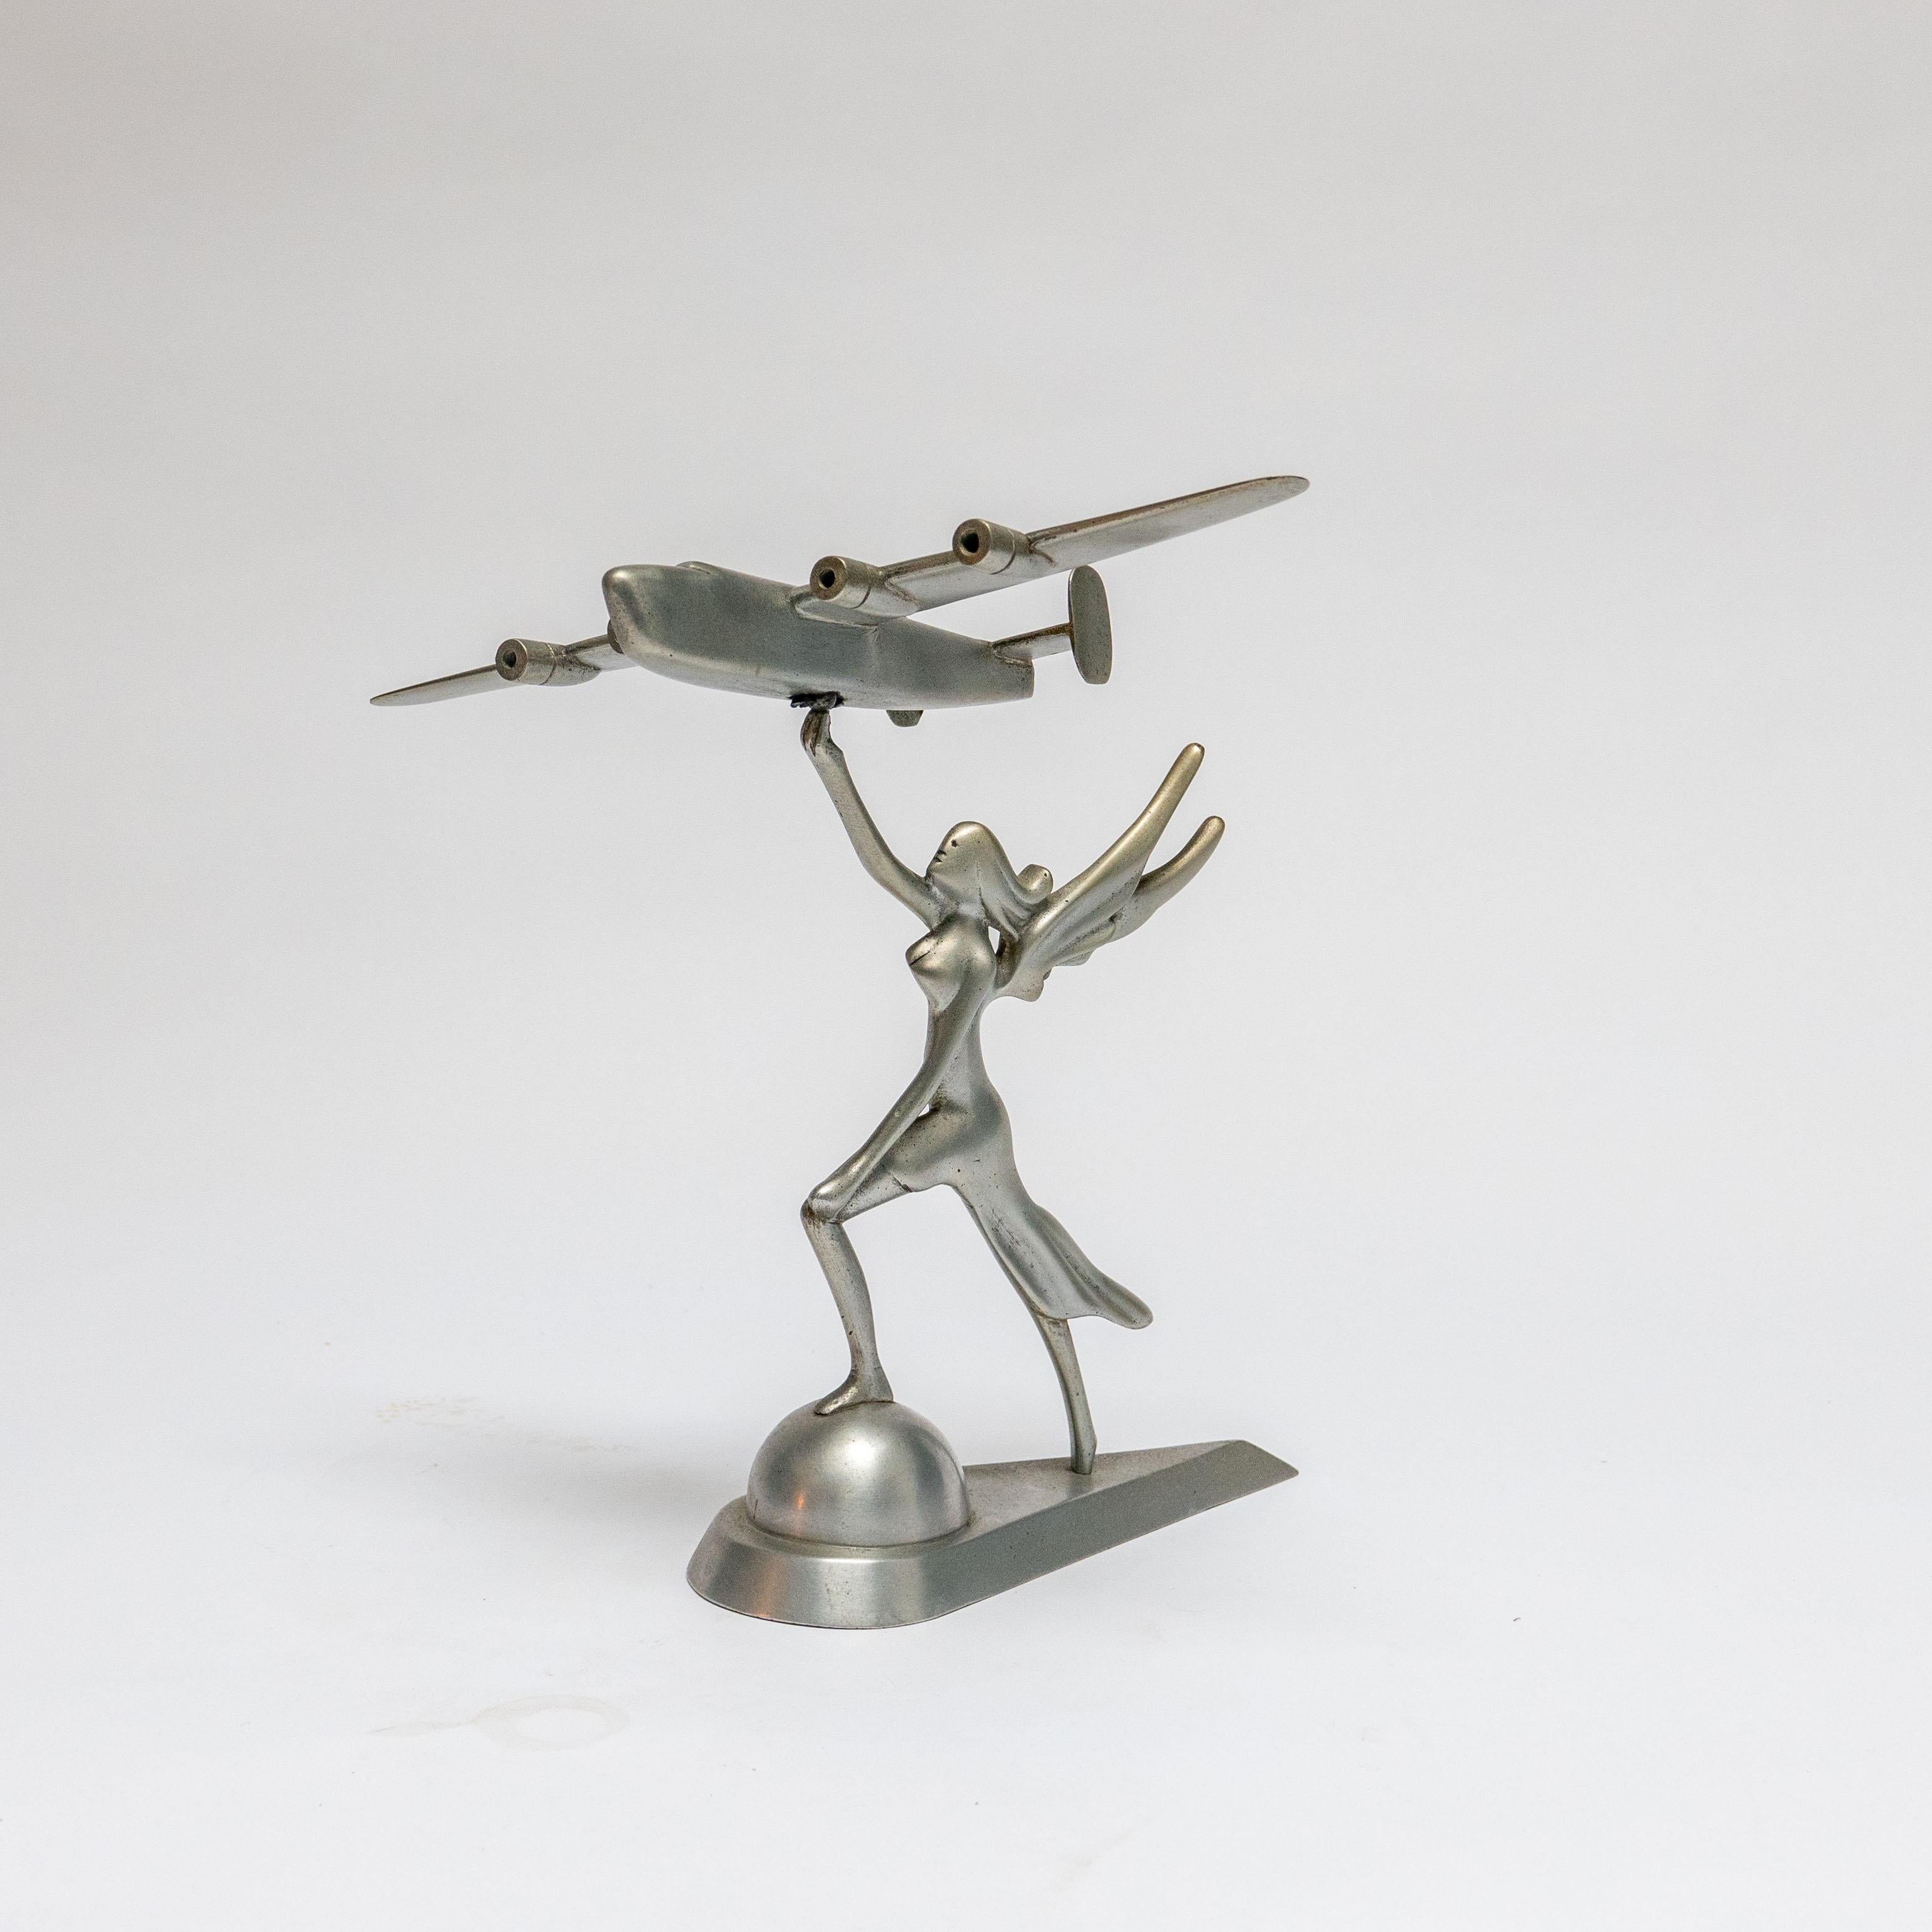 Italian Decorative Sculpture of a Goddess Holding a Consolidated B-24 Liberator For Sale